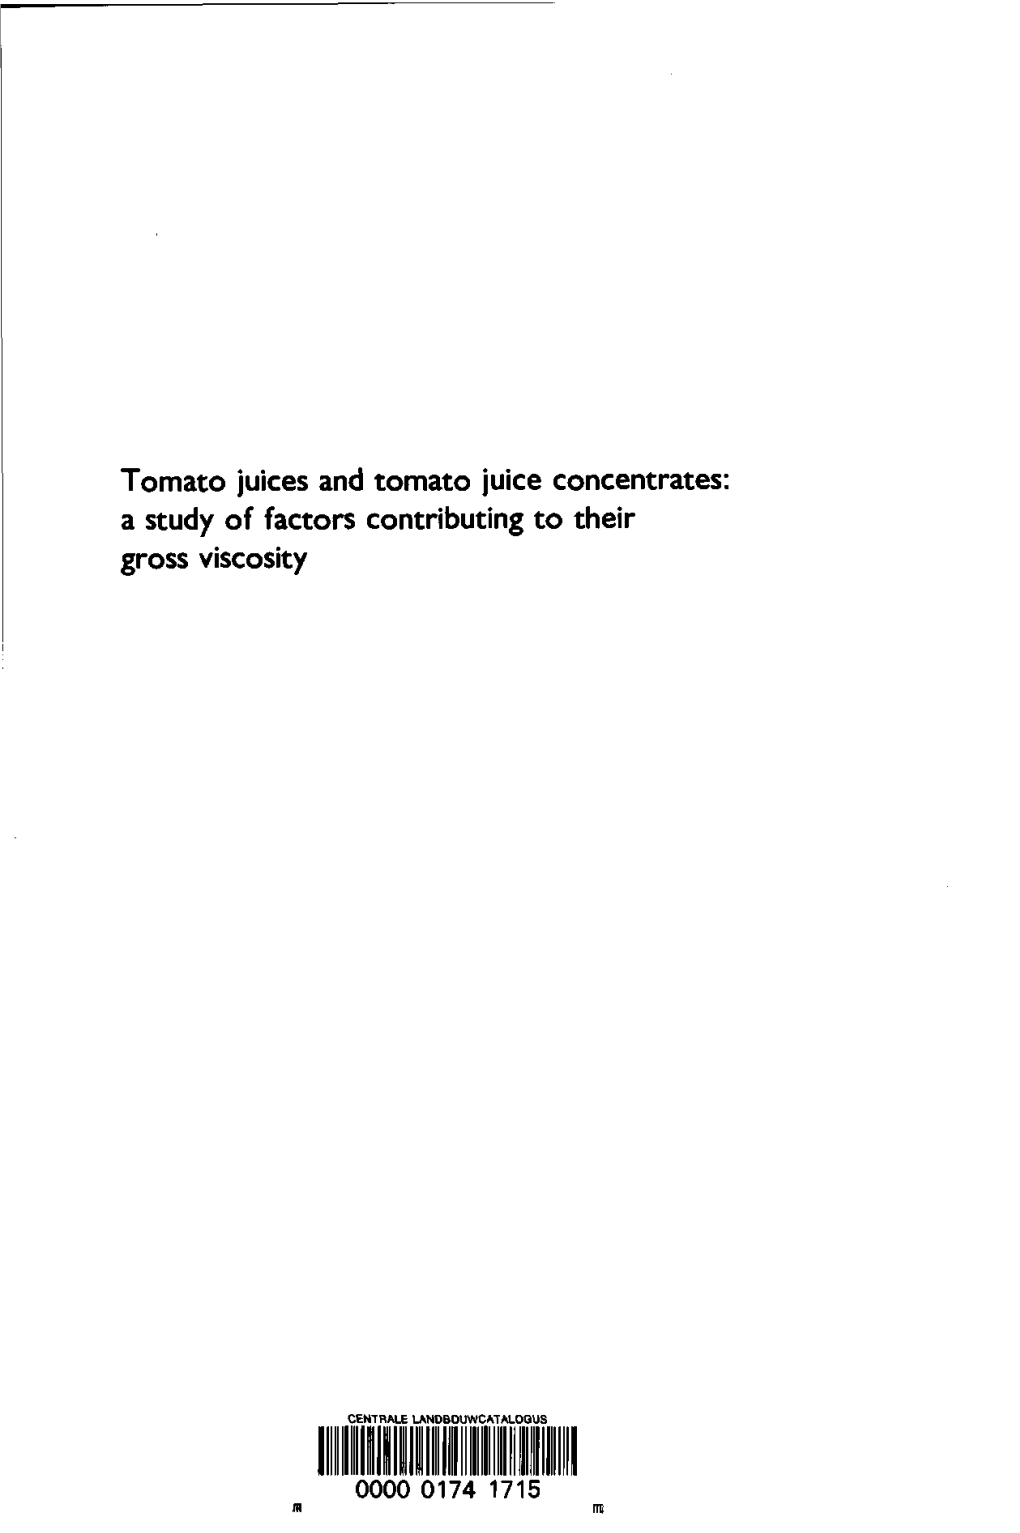 Tomato Juices and Tomato Juice Concentrates: a Study of Factors Contributing to Their Gross Viscosity